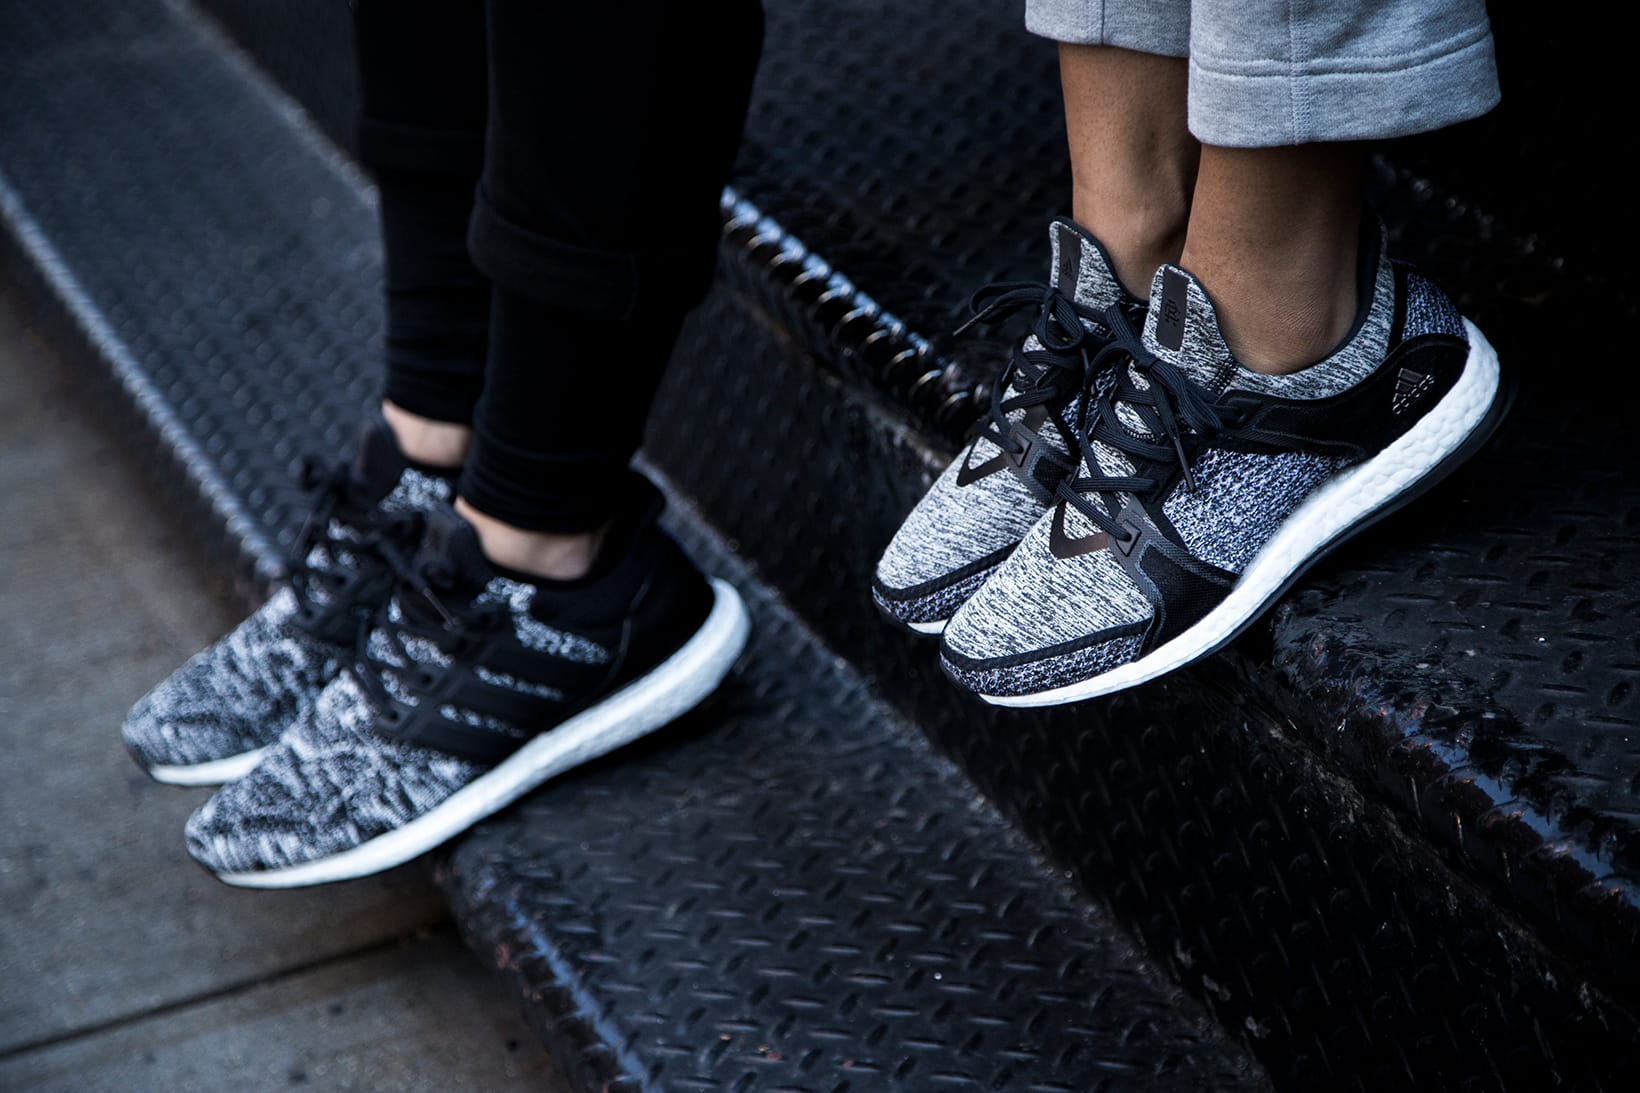 adidas x reigning champ pureboost shoes